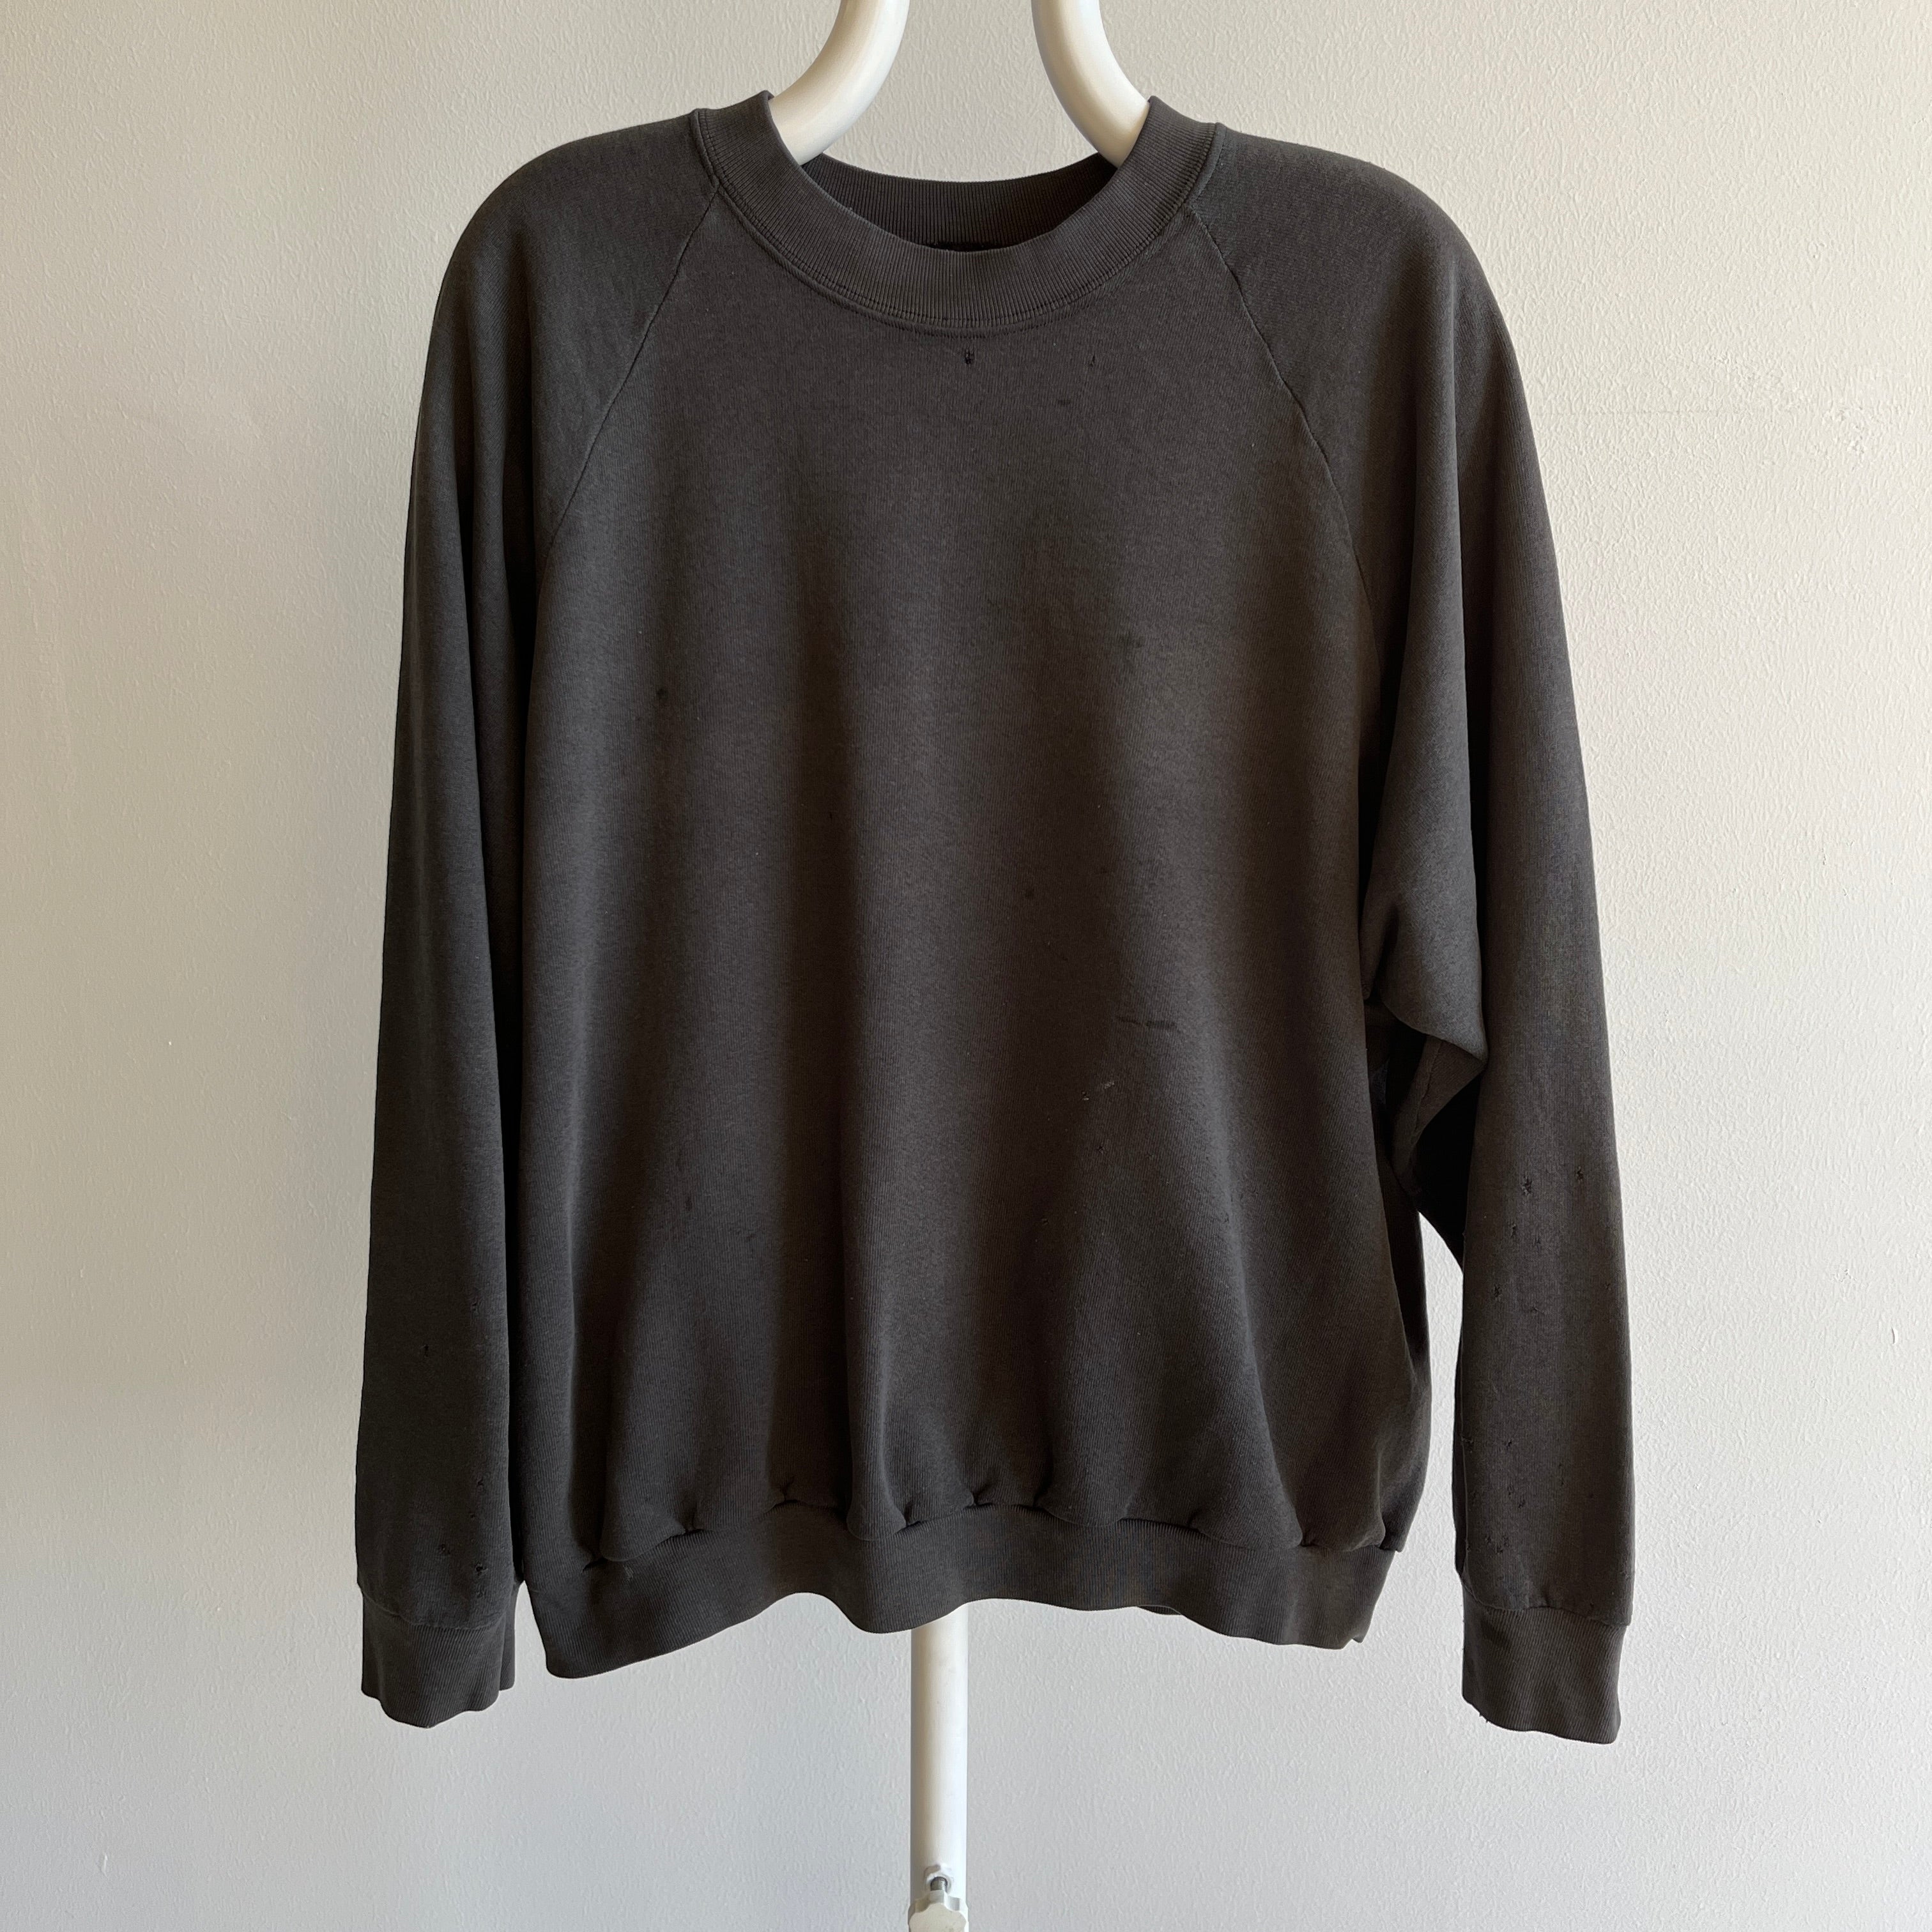 1980s Thinned Out and Disheveled Faded Black to Deep Gray Raglan